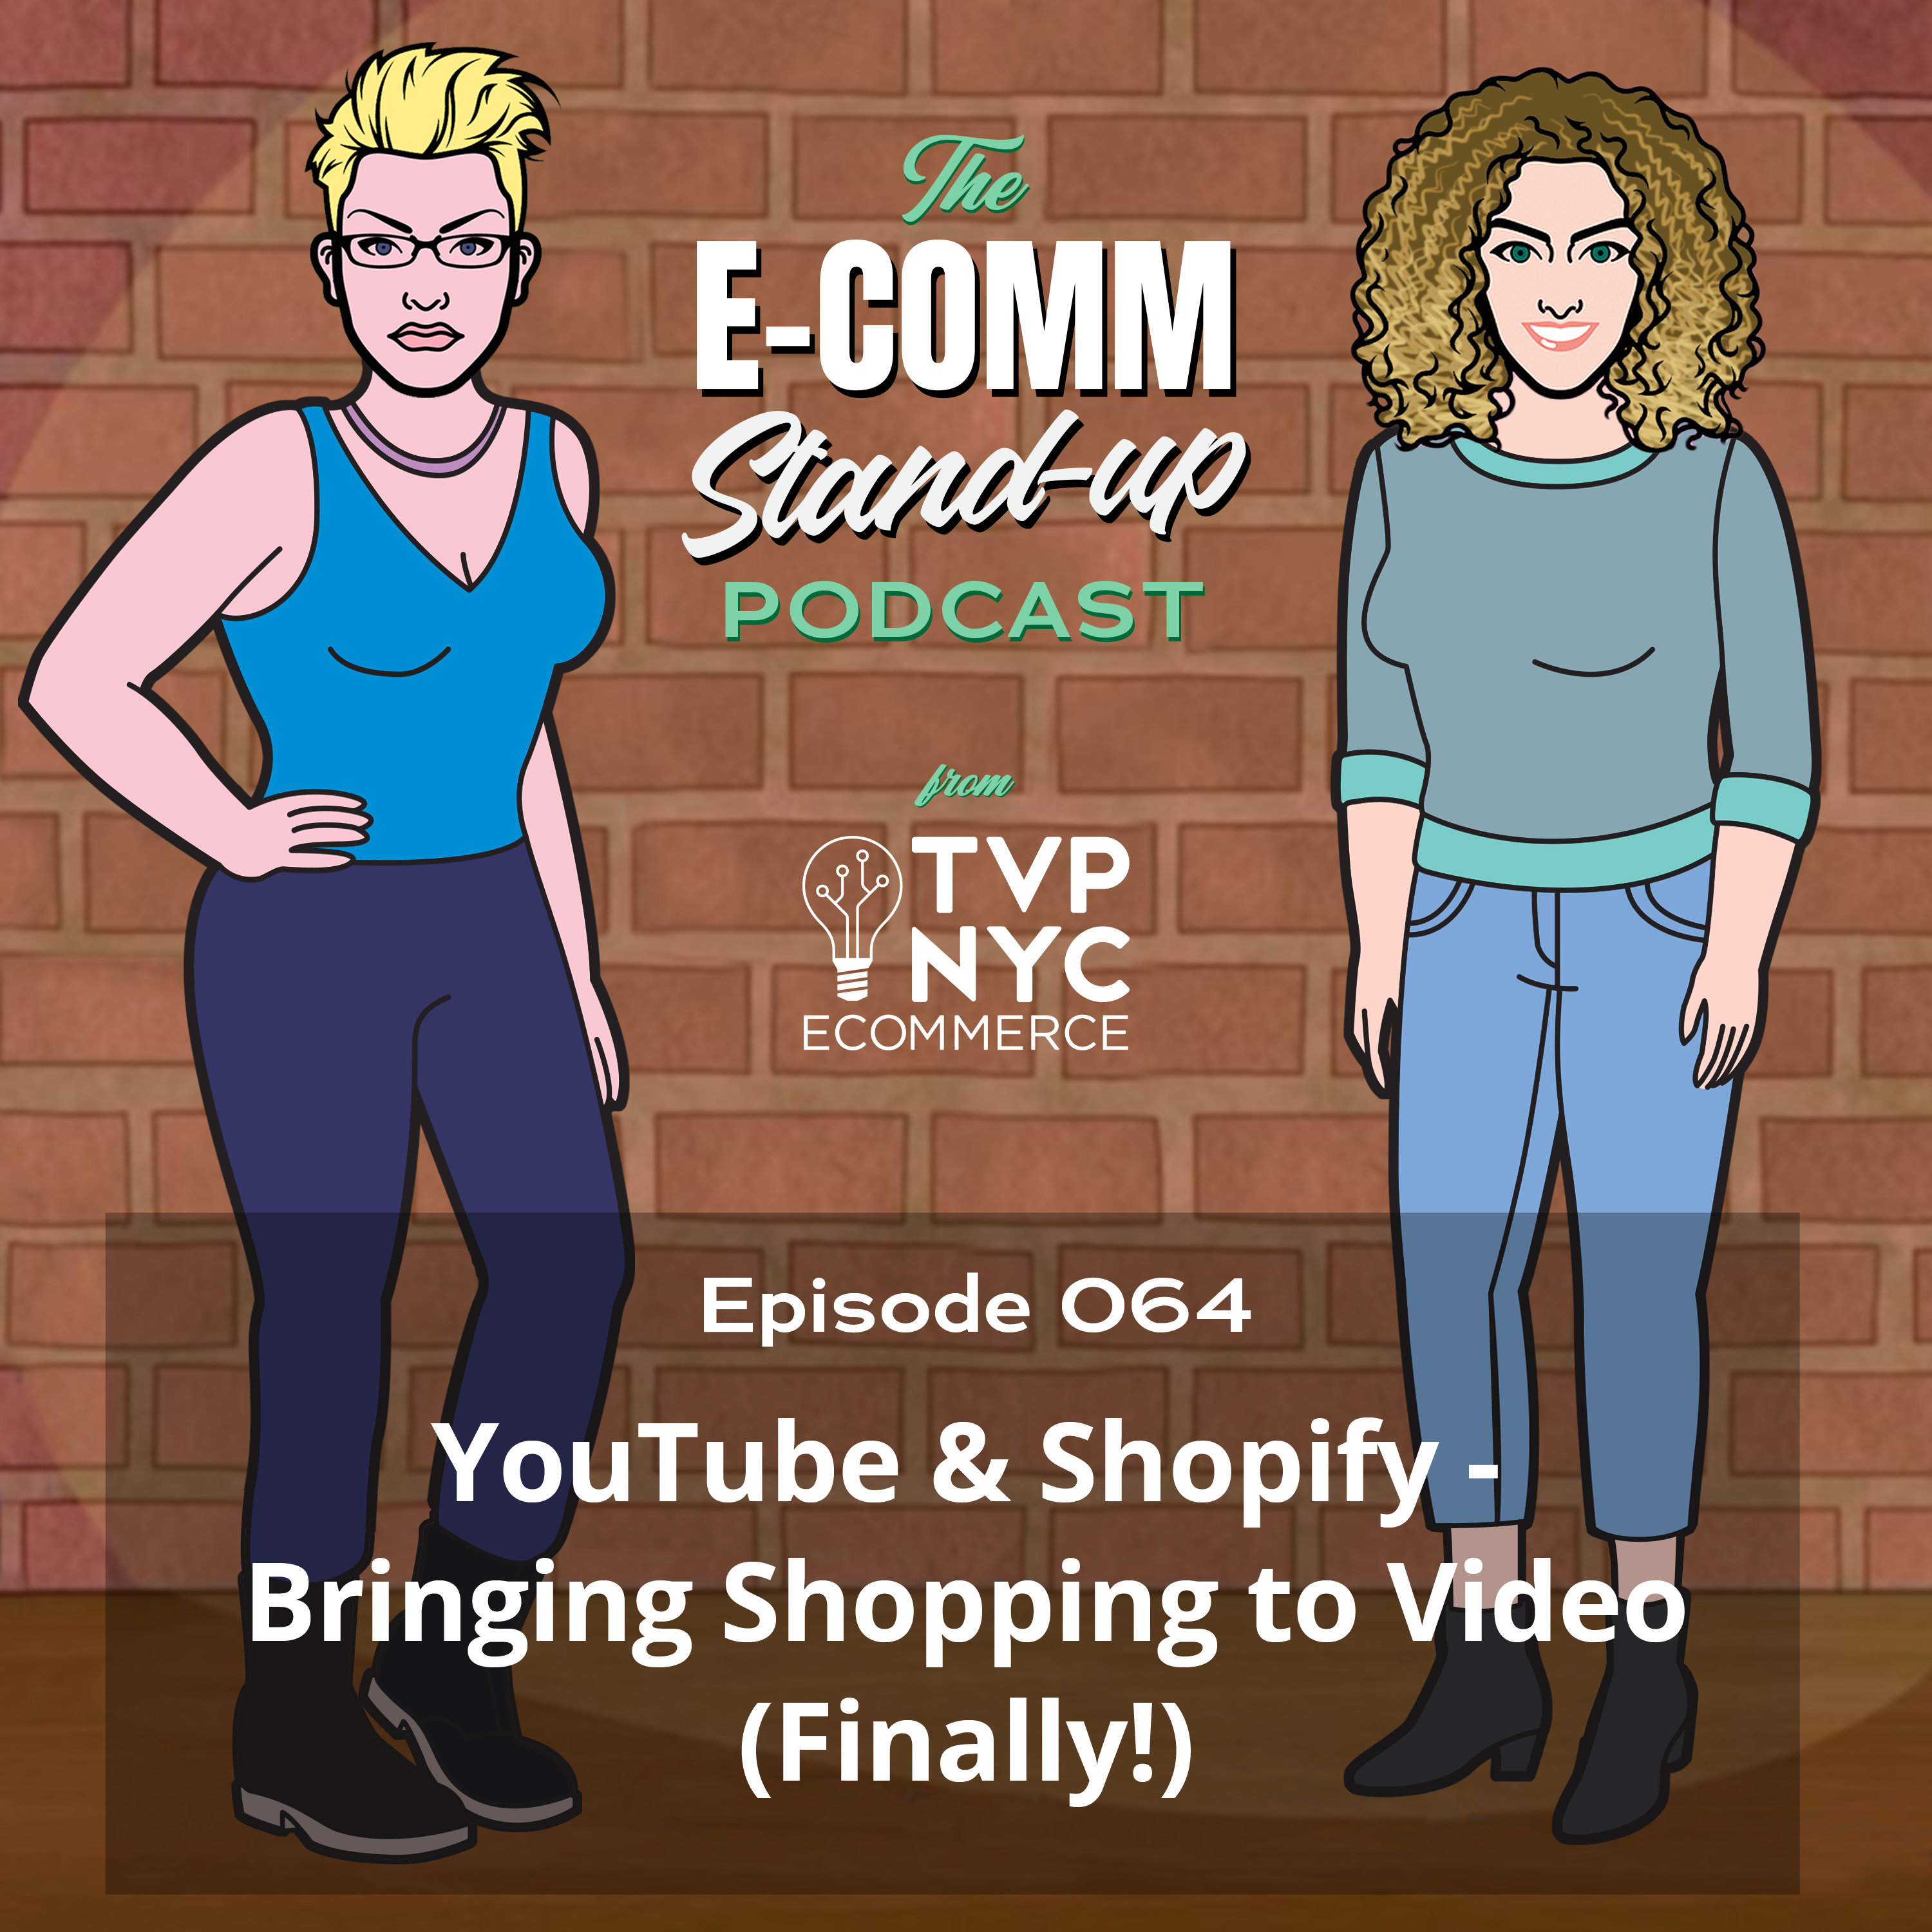 YouTube & Shopify - Bringing Shopping to Video (Finally!)